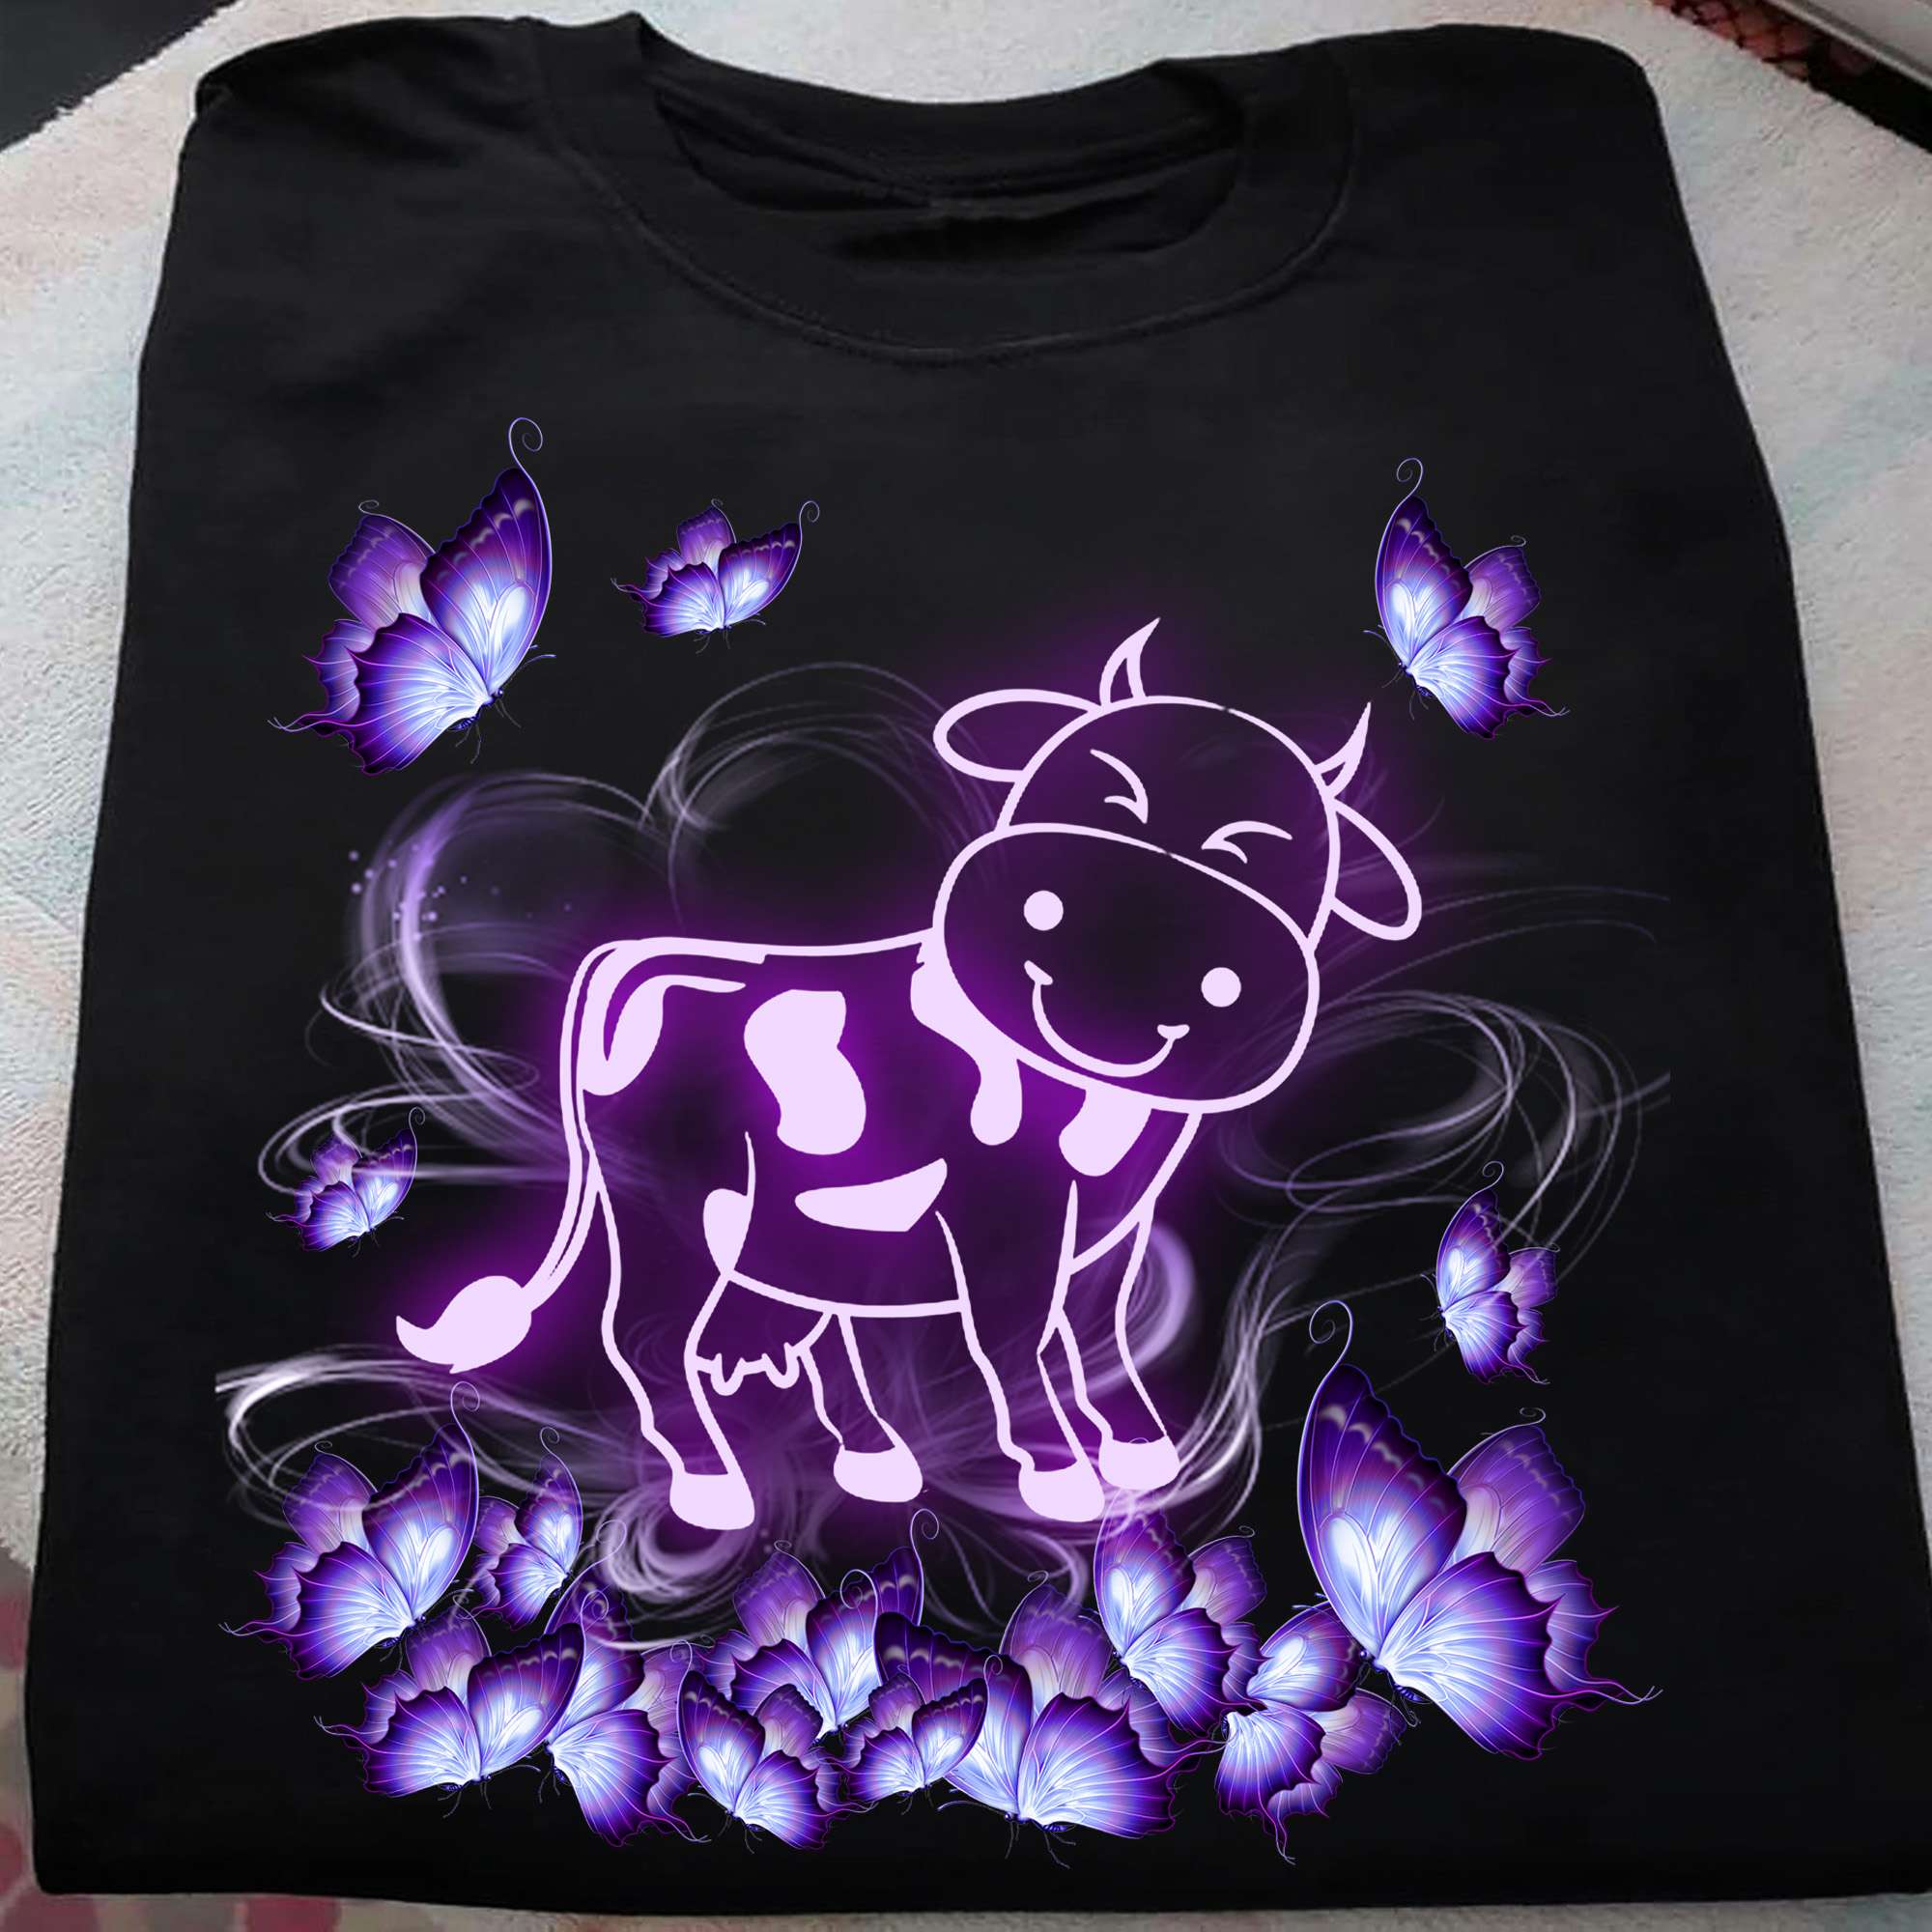 Funny Dairy Cows - Purple dairy cows, purple butterfly